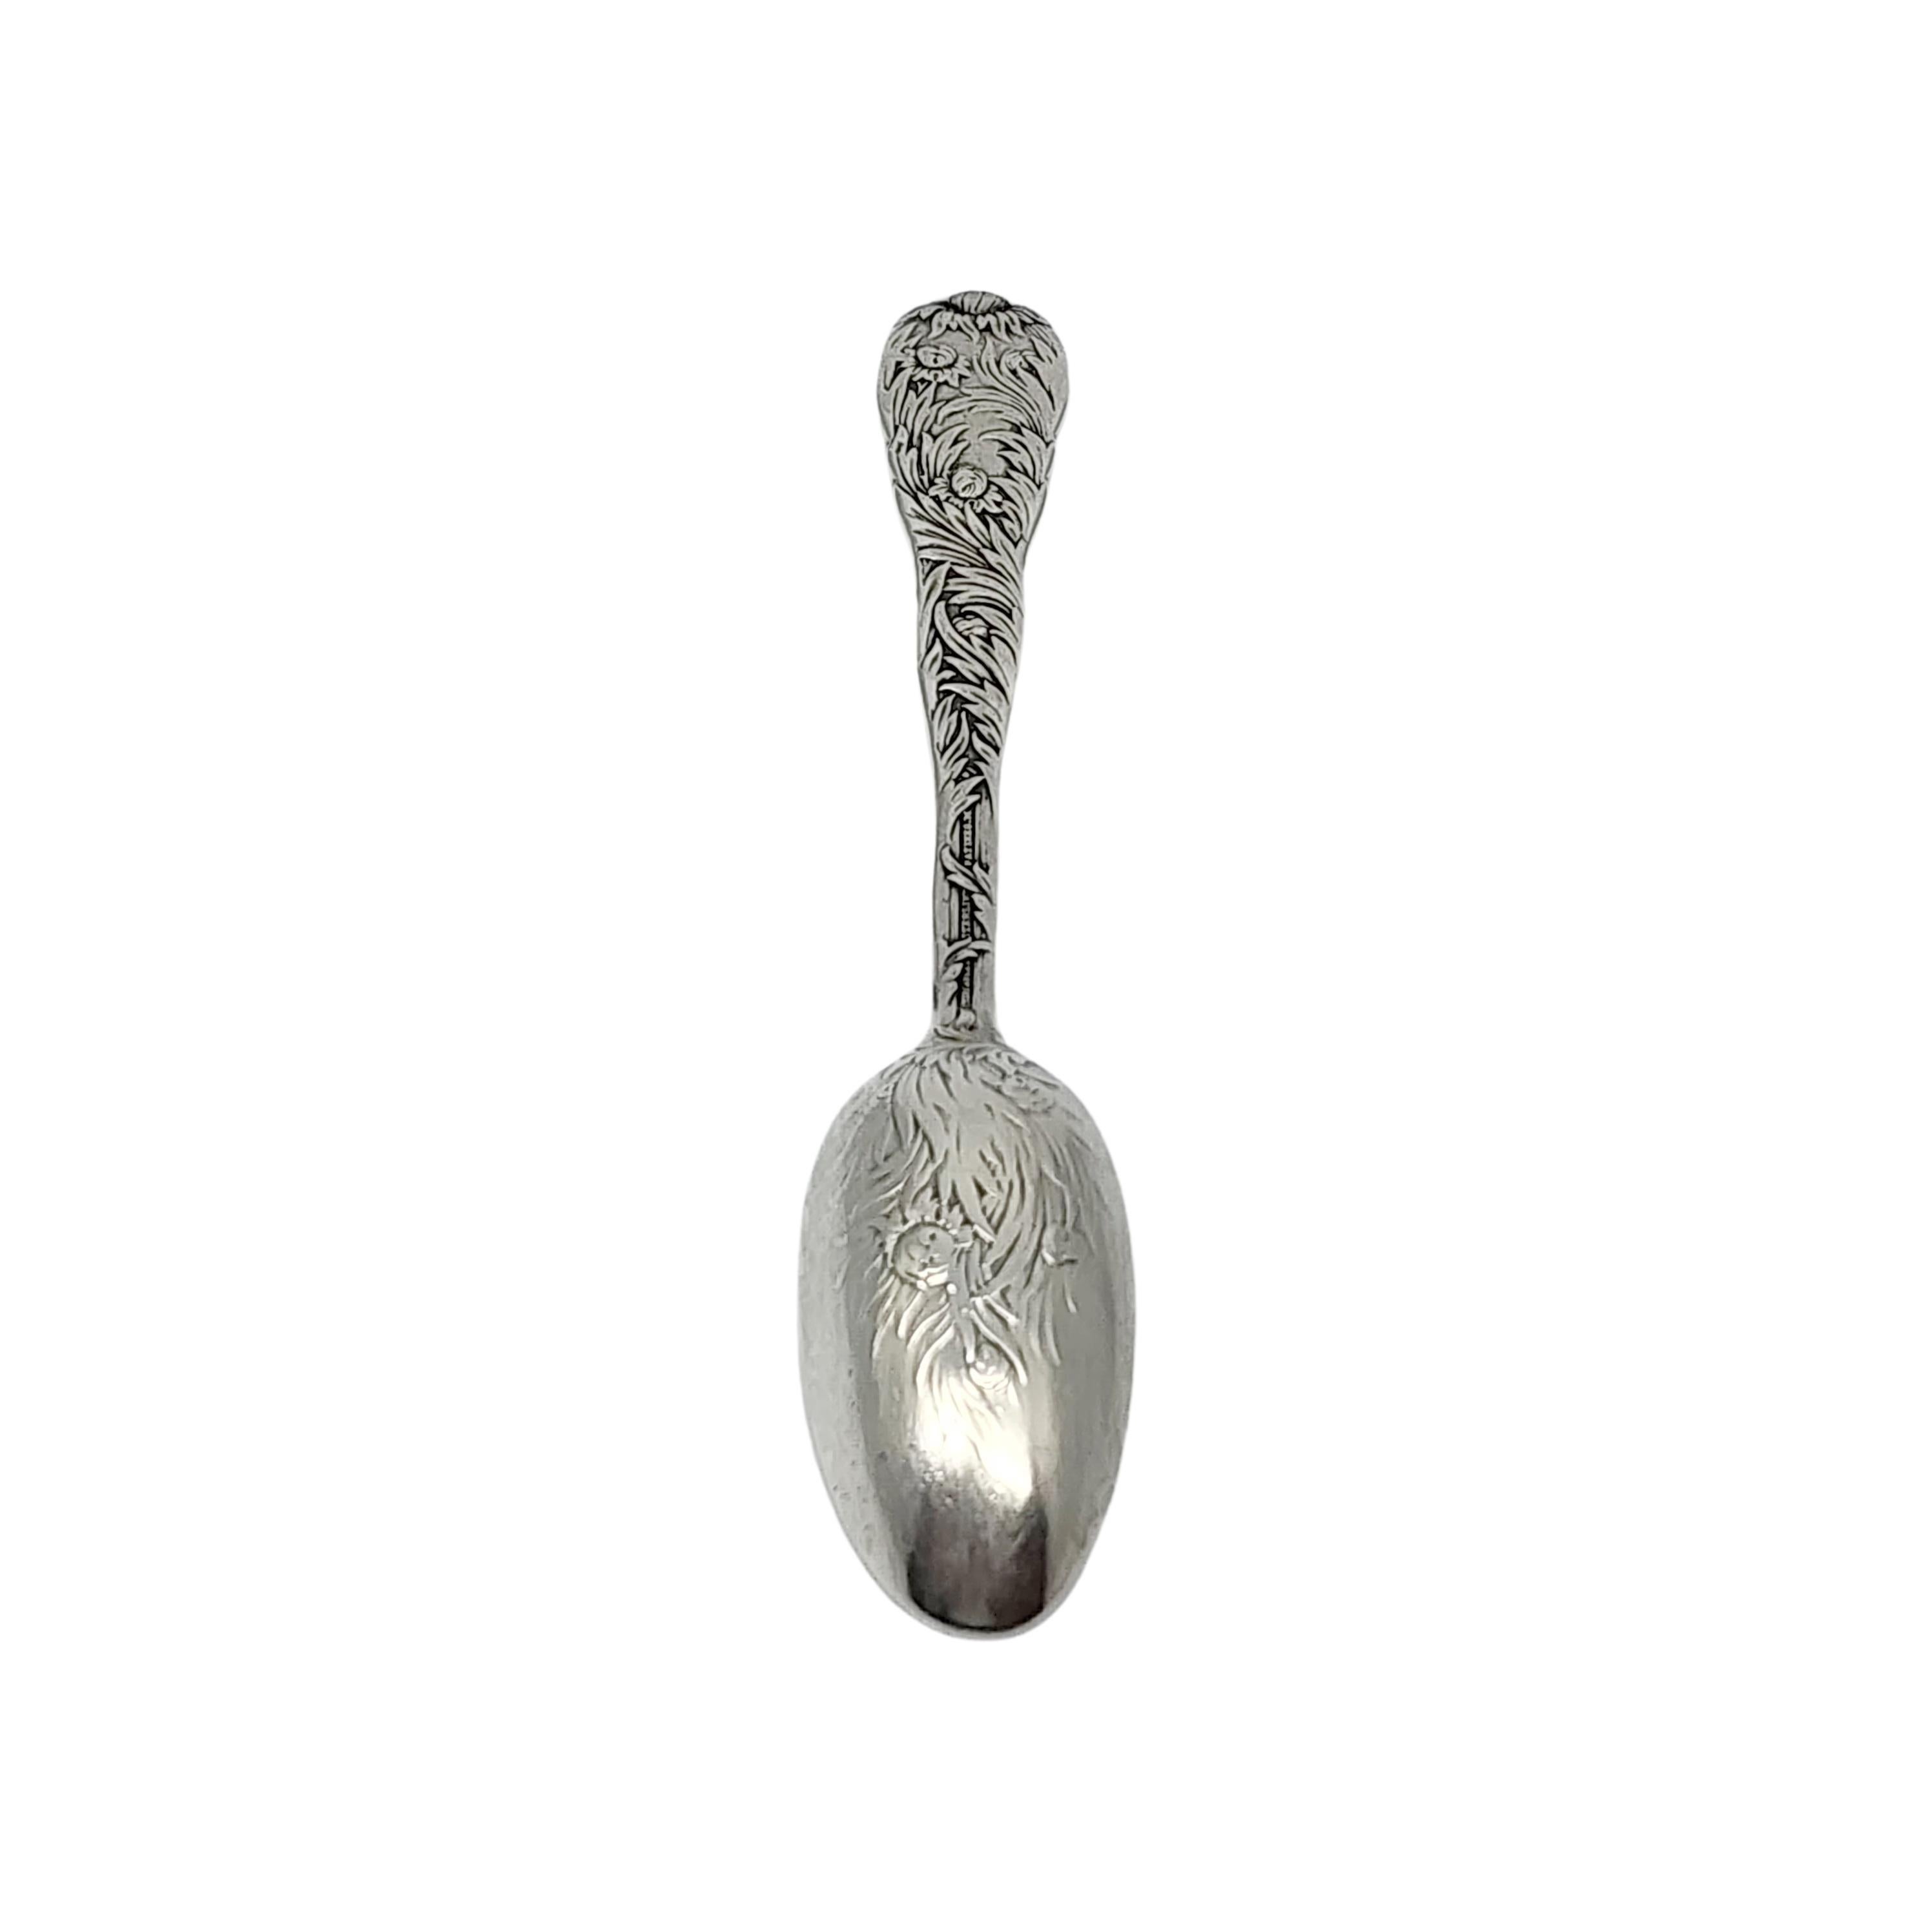 Sterling silver teaspoon by Tiffany & Co in the Chrysanthemum pattern with monogram.

Monogram appears to be EJC

The Chrysanthemum pattern, designed by Charles T. Grosjean in 1880, is an extravagant and intricate design featuring chrysanthemum buds